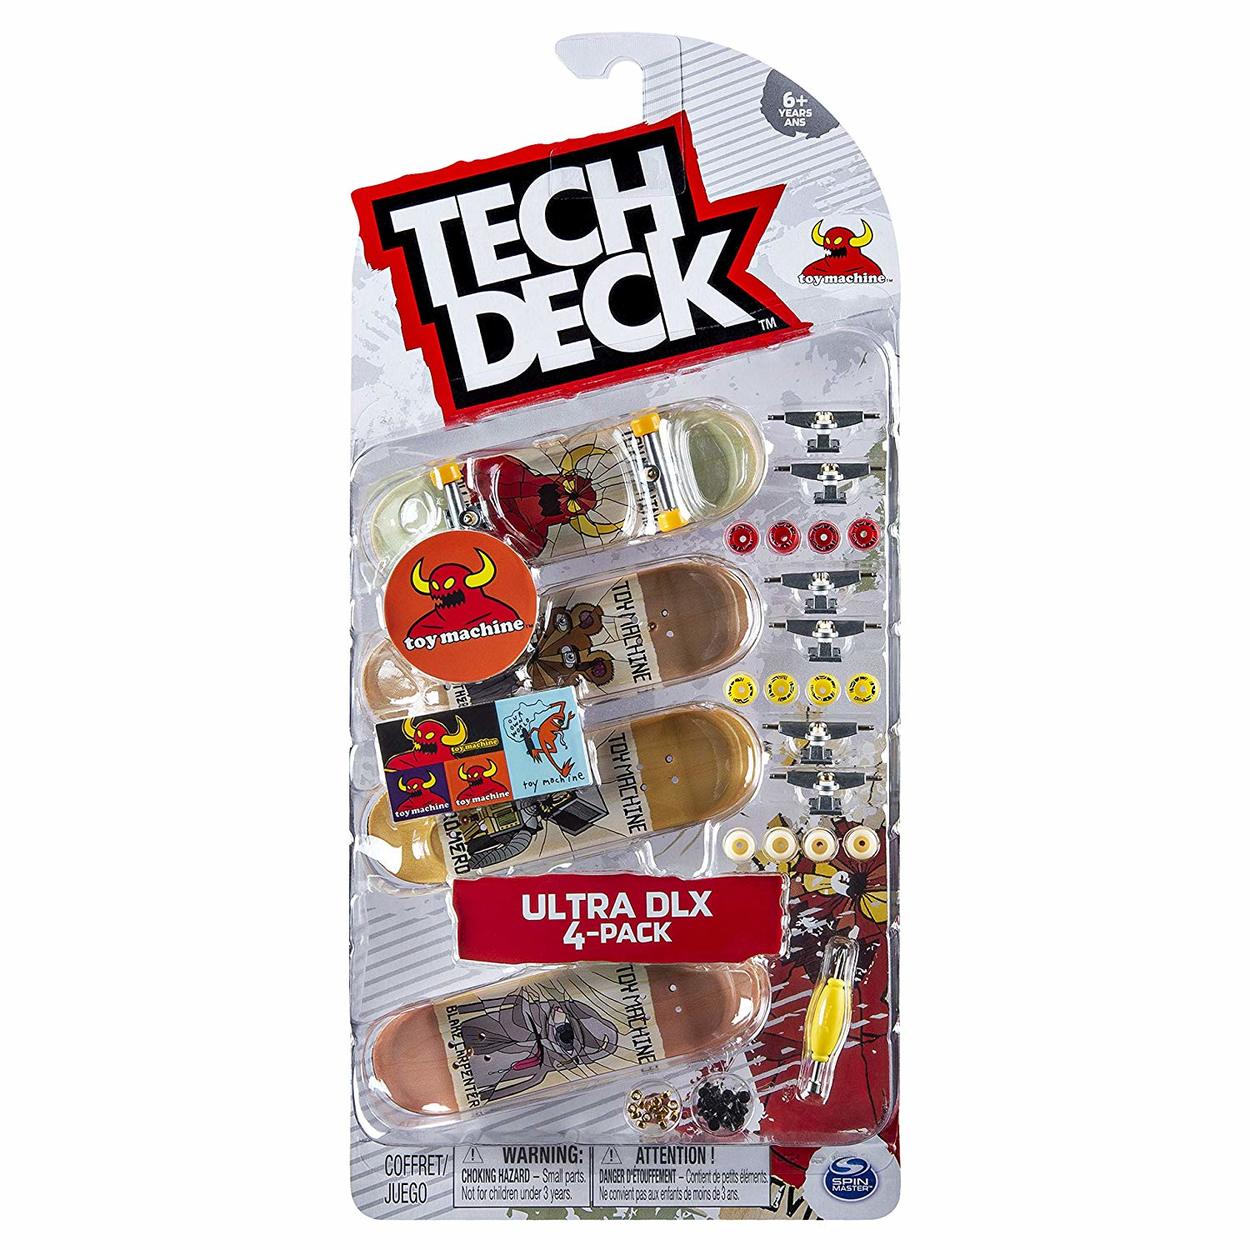 Tech Deck Ultra DLX 4-Pack Completes - Toy Machine